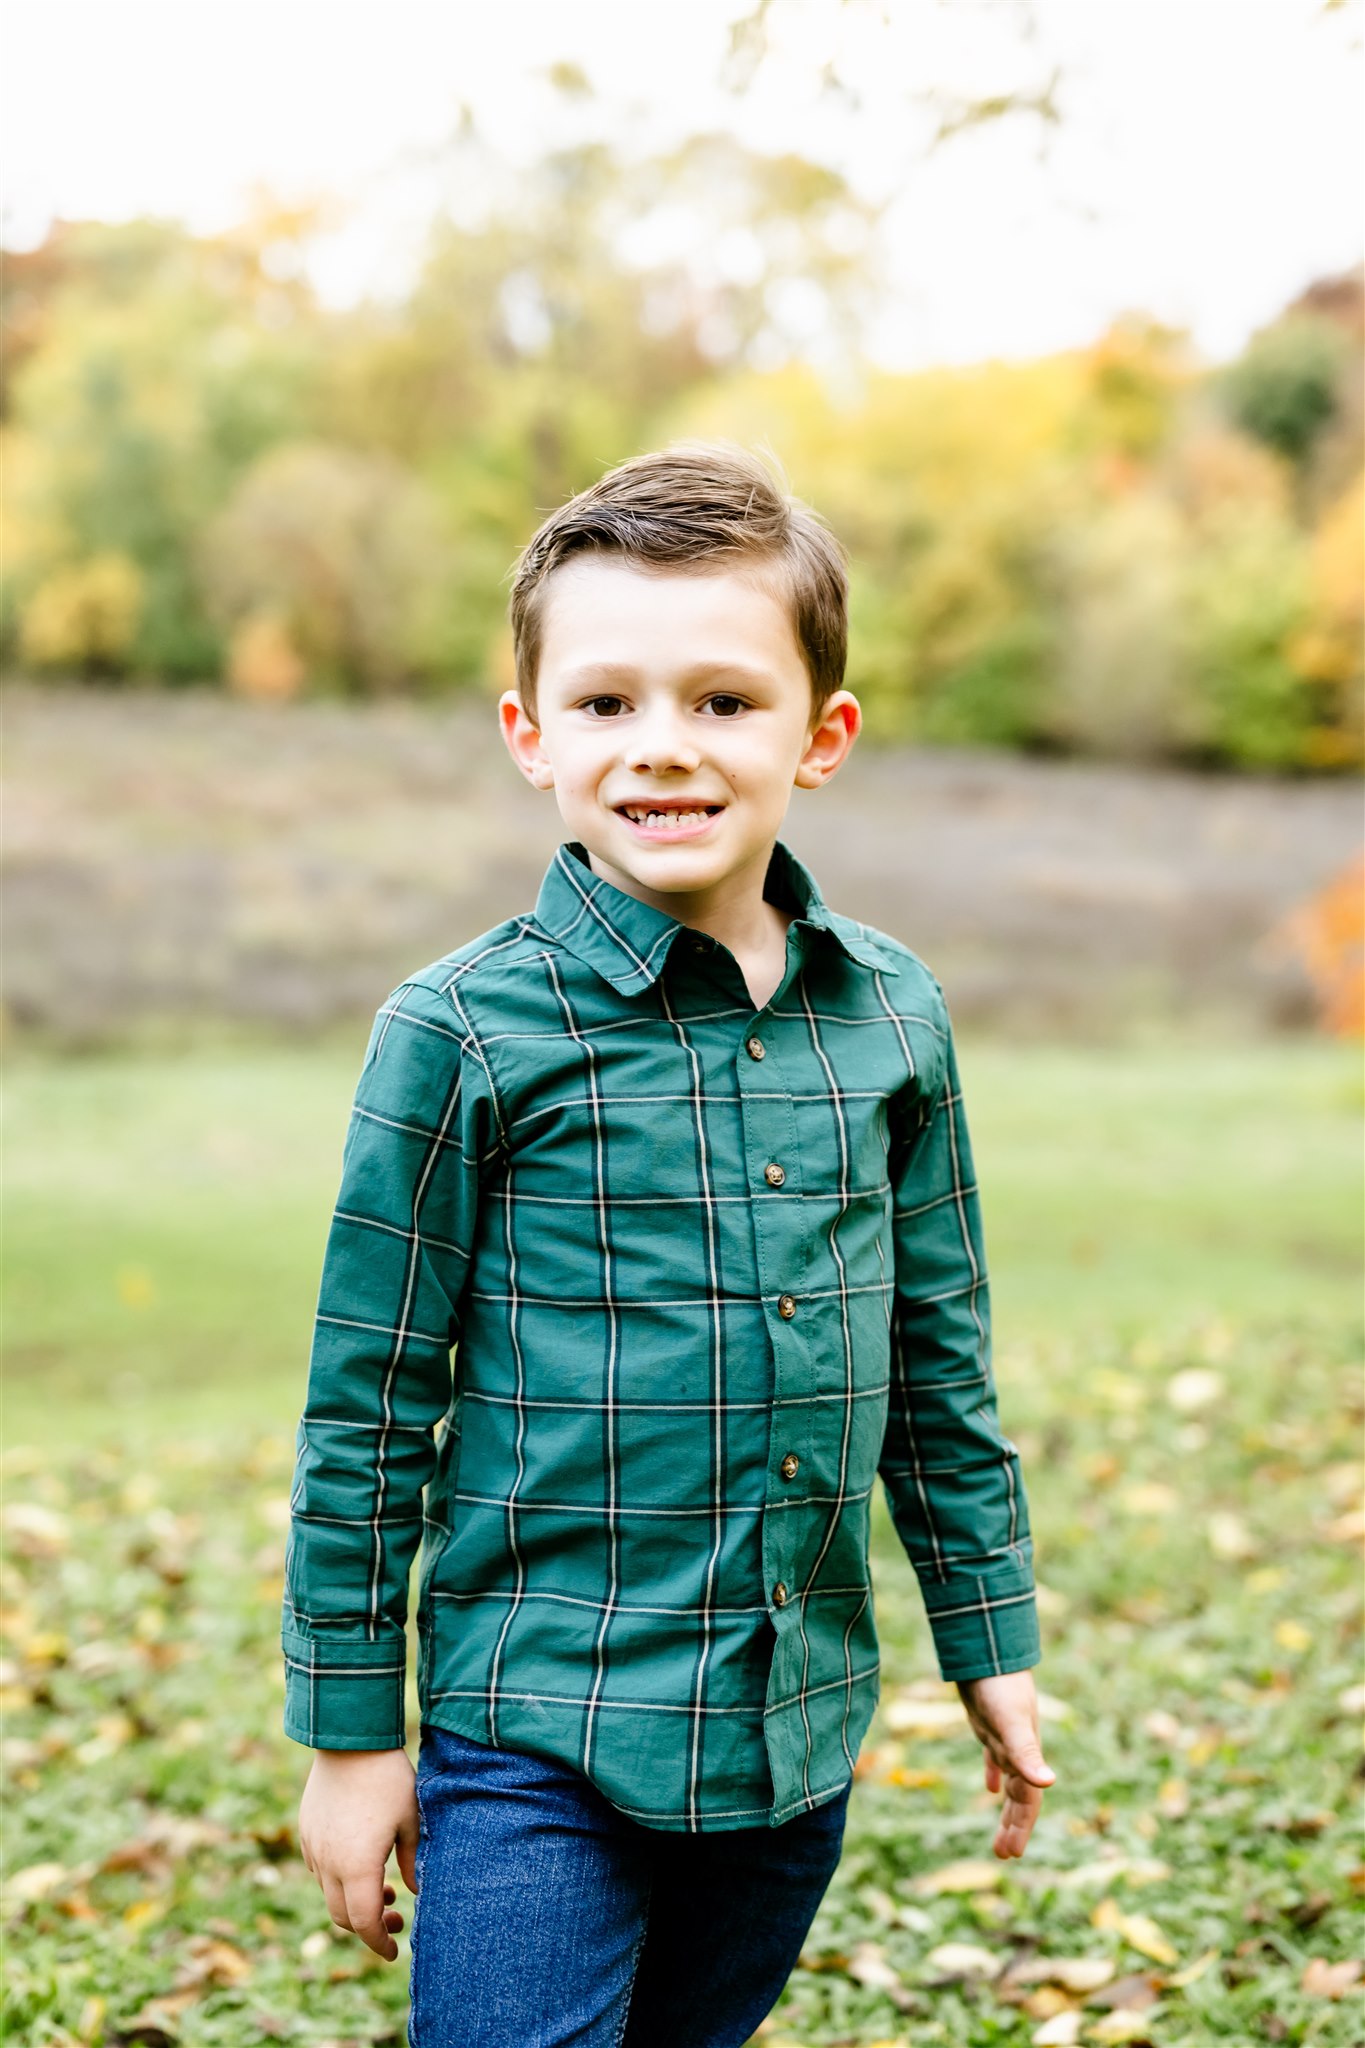 A young boy in a green plaid shirt smiles while standing in a grassy park